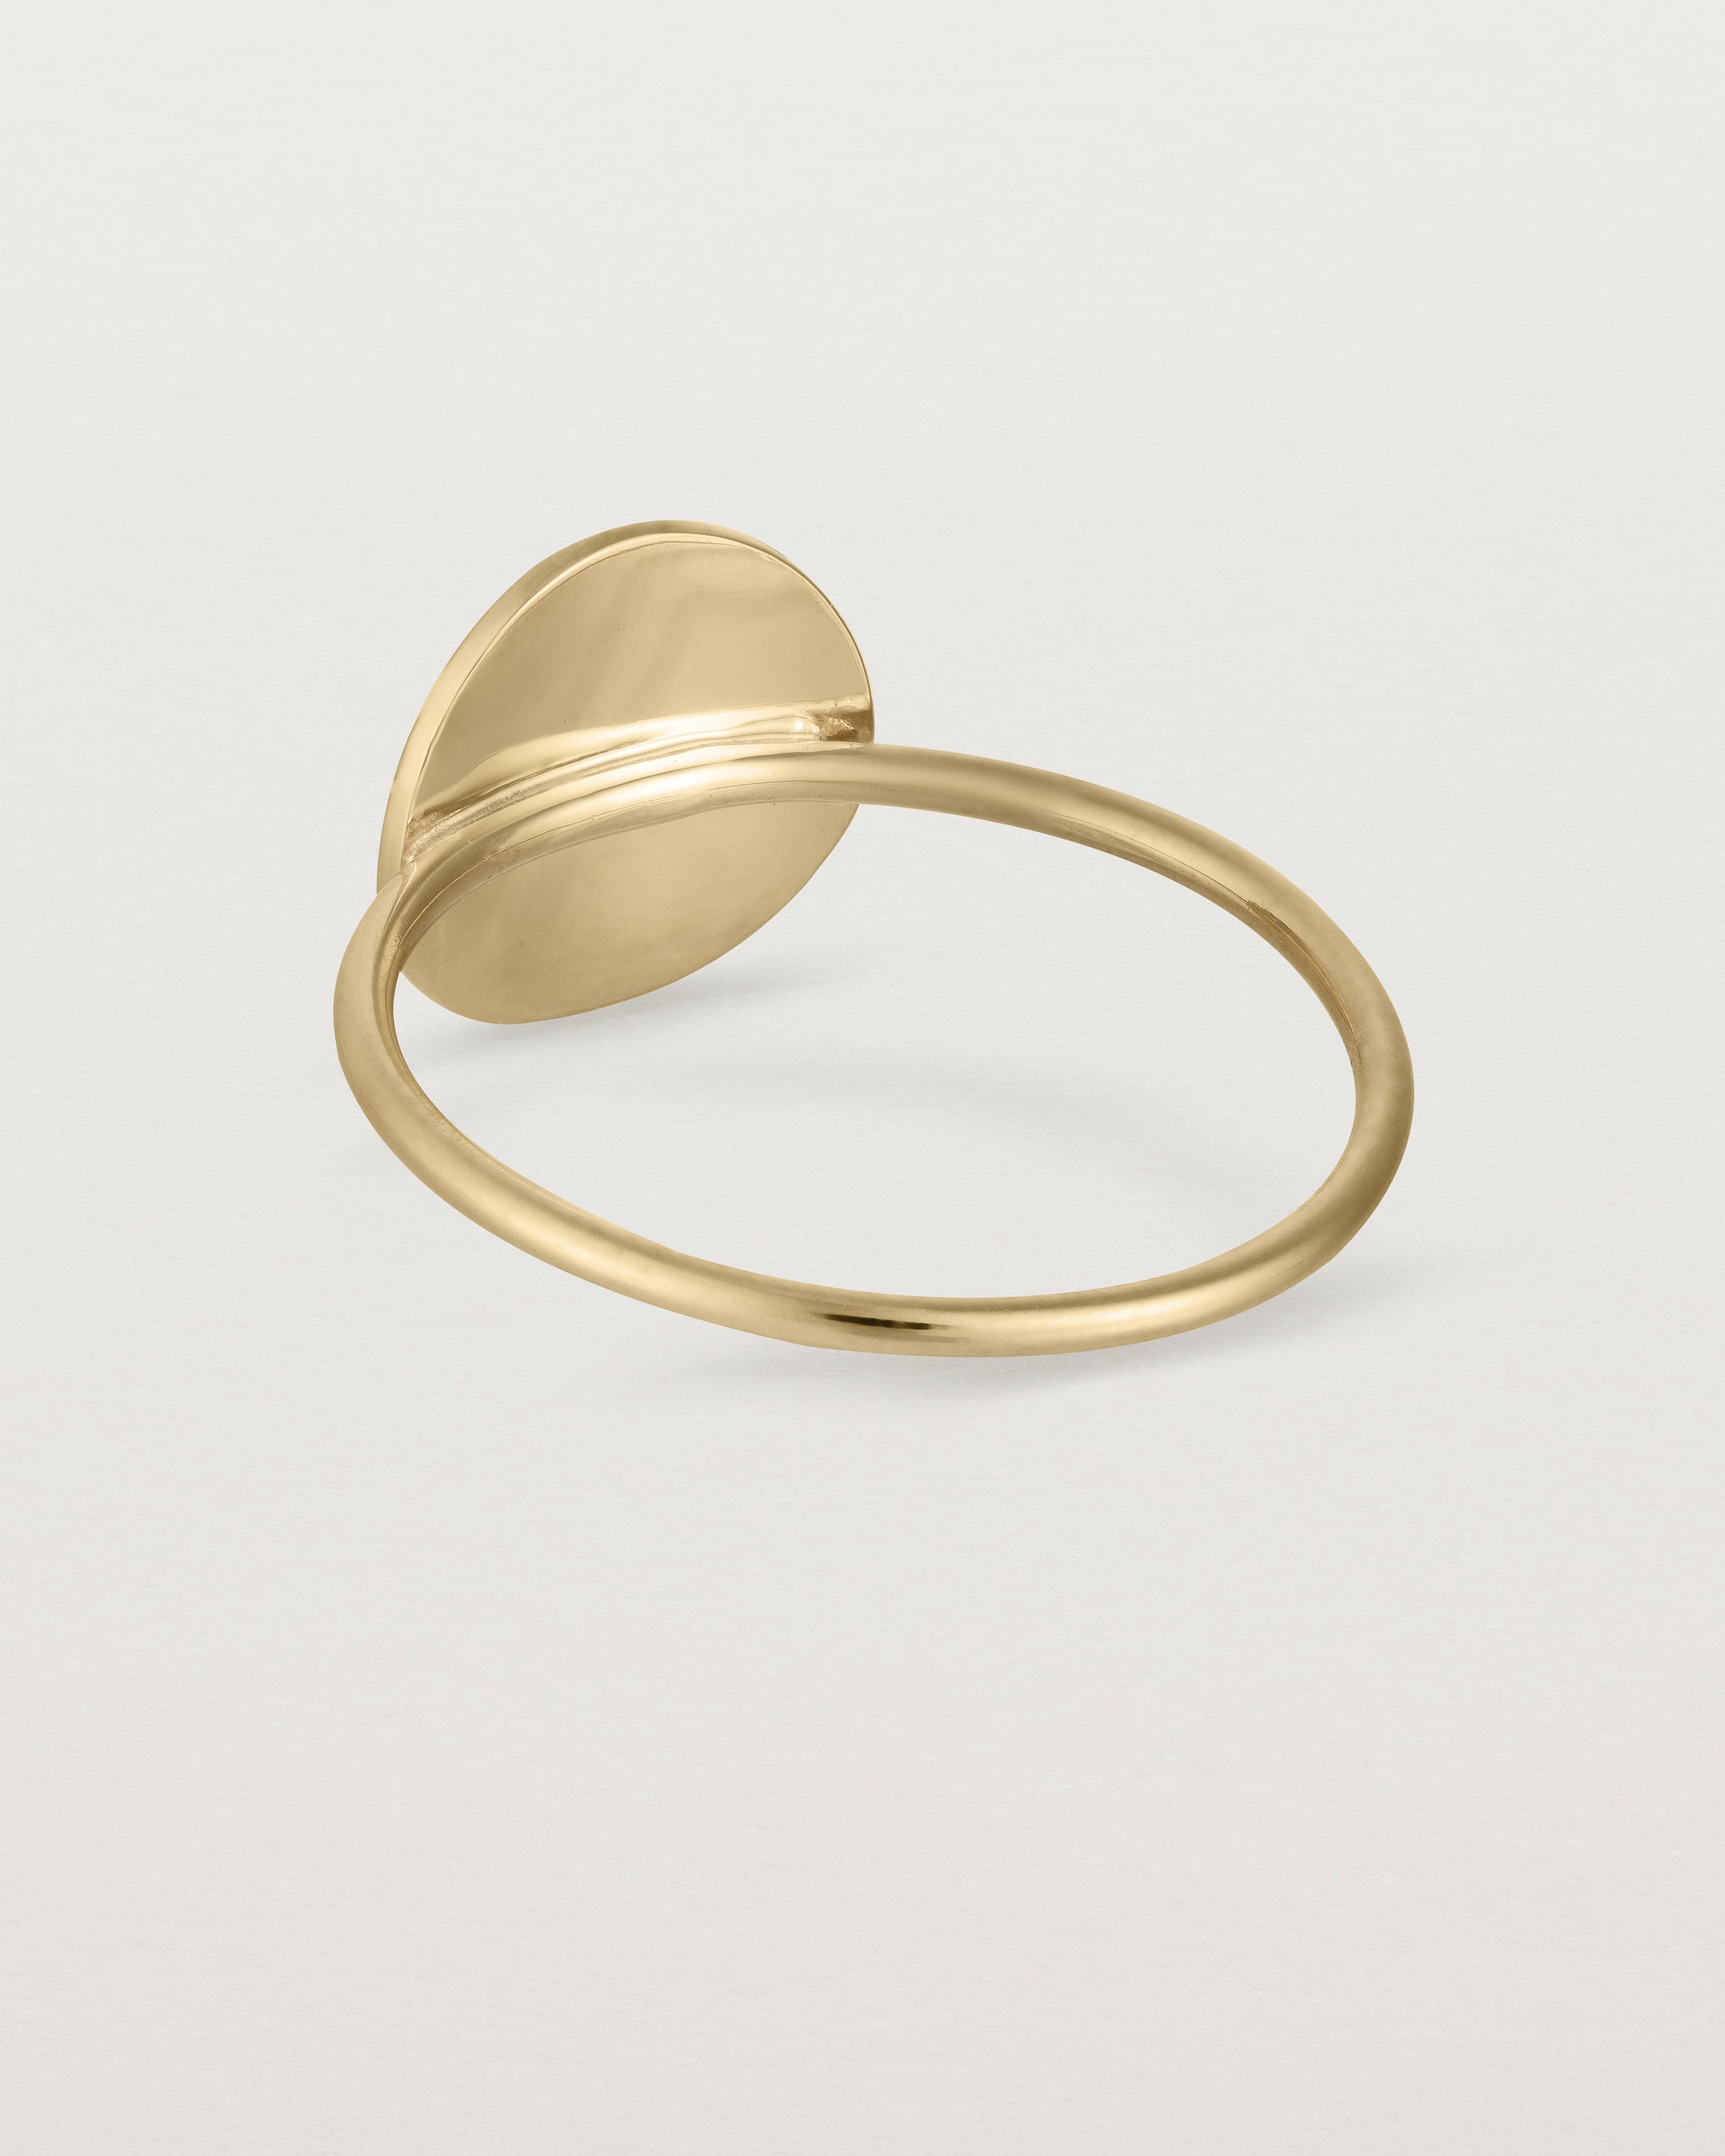 Back view of the Mini Initial Ring in Yellow Gold.